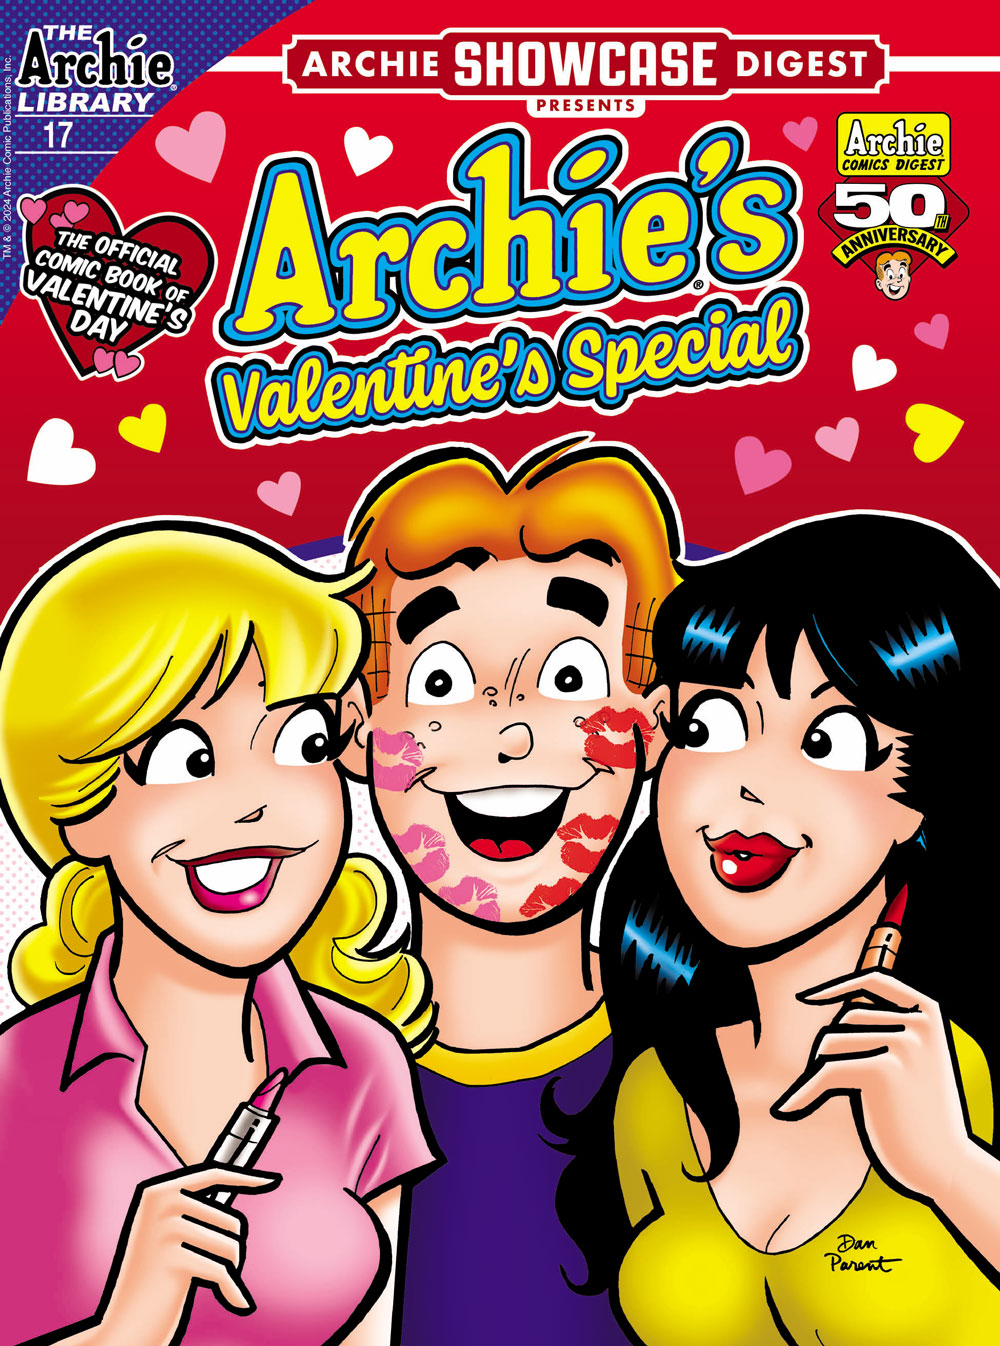 Cover of ARCHIE SHOWCASE DIGEST #17. Betty and Veronica have just kissed Archie, who has lipstick marks on his face. 